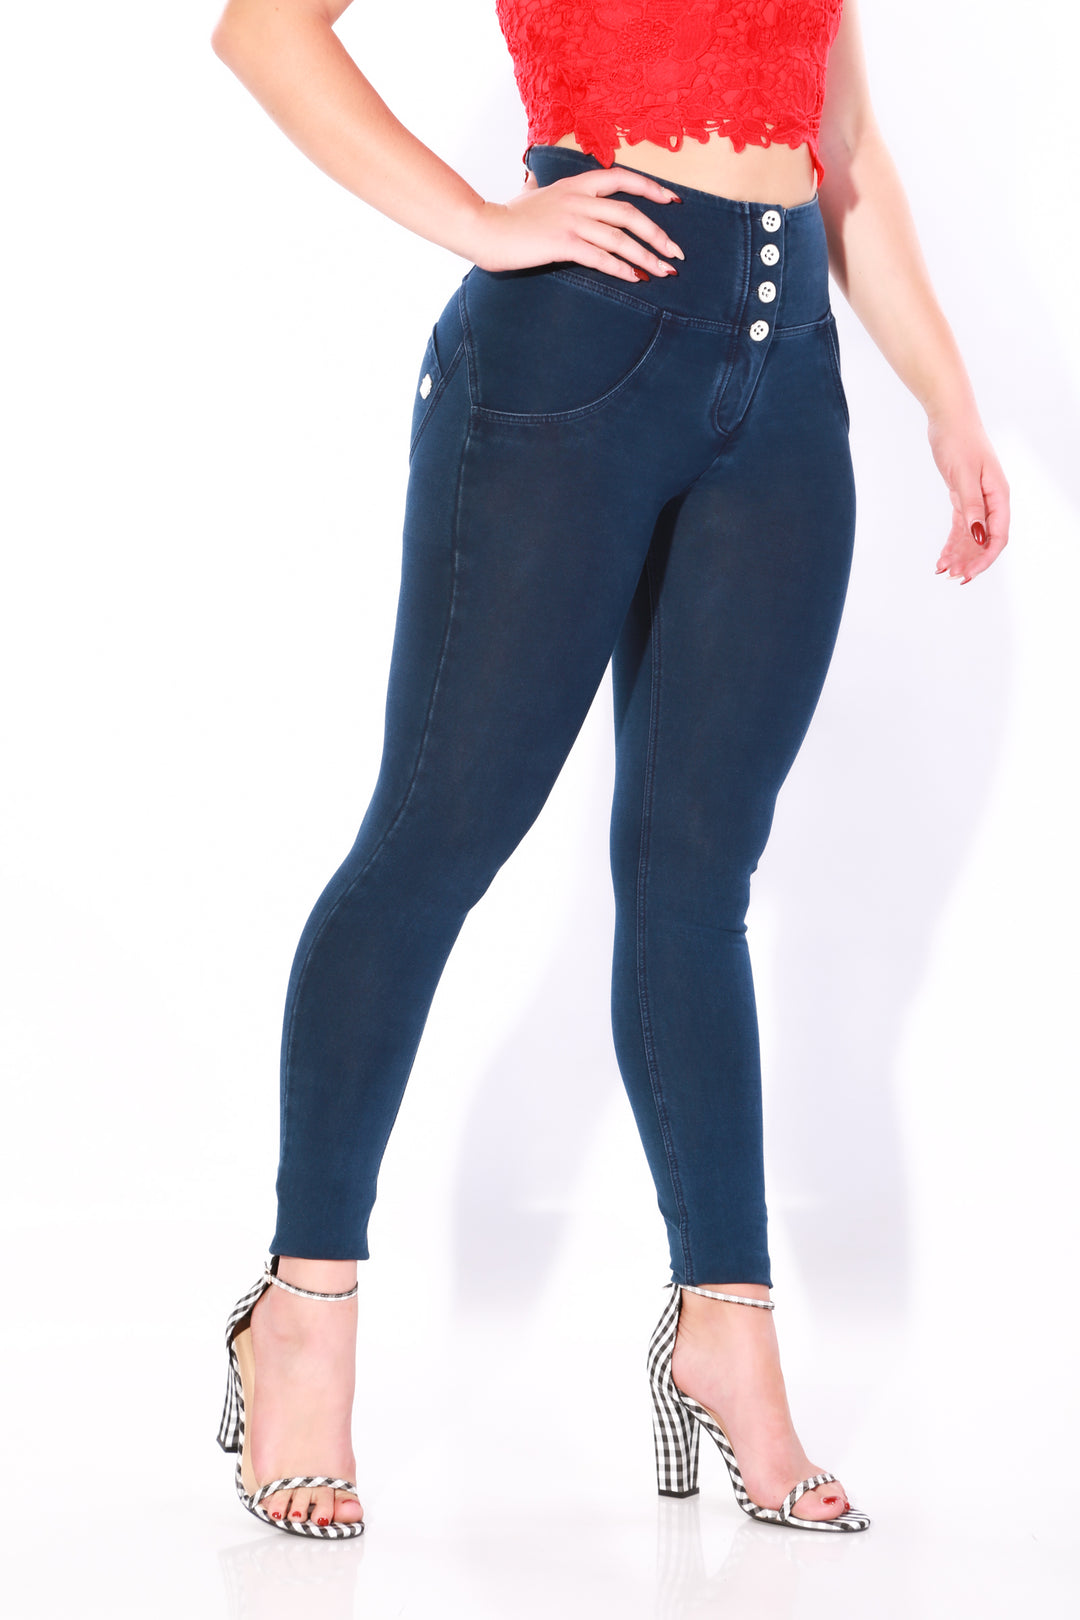 High waist Button up Butt lifting Shaping jeans Jeggings - Dark Blueaos-init aos-animate